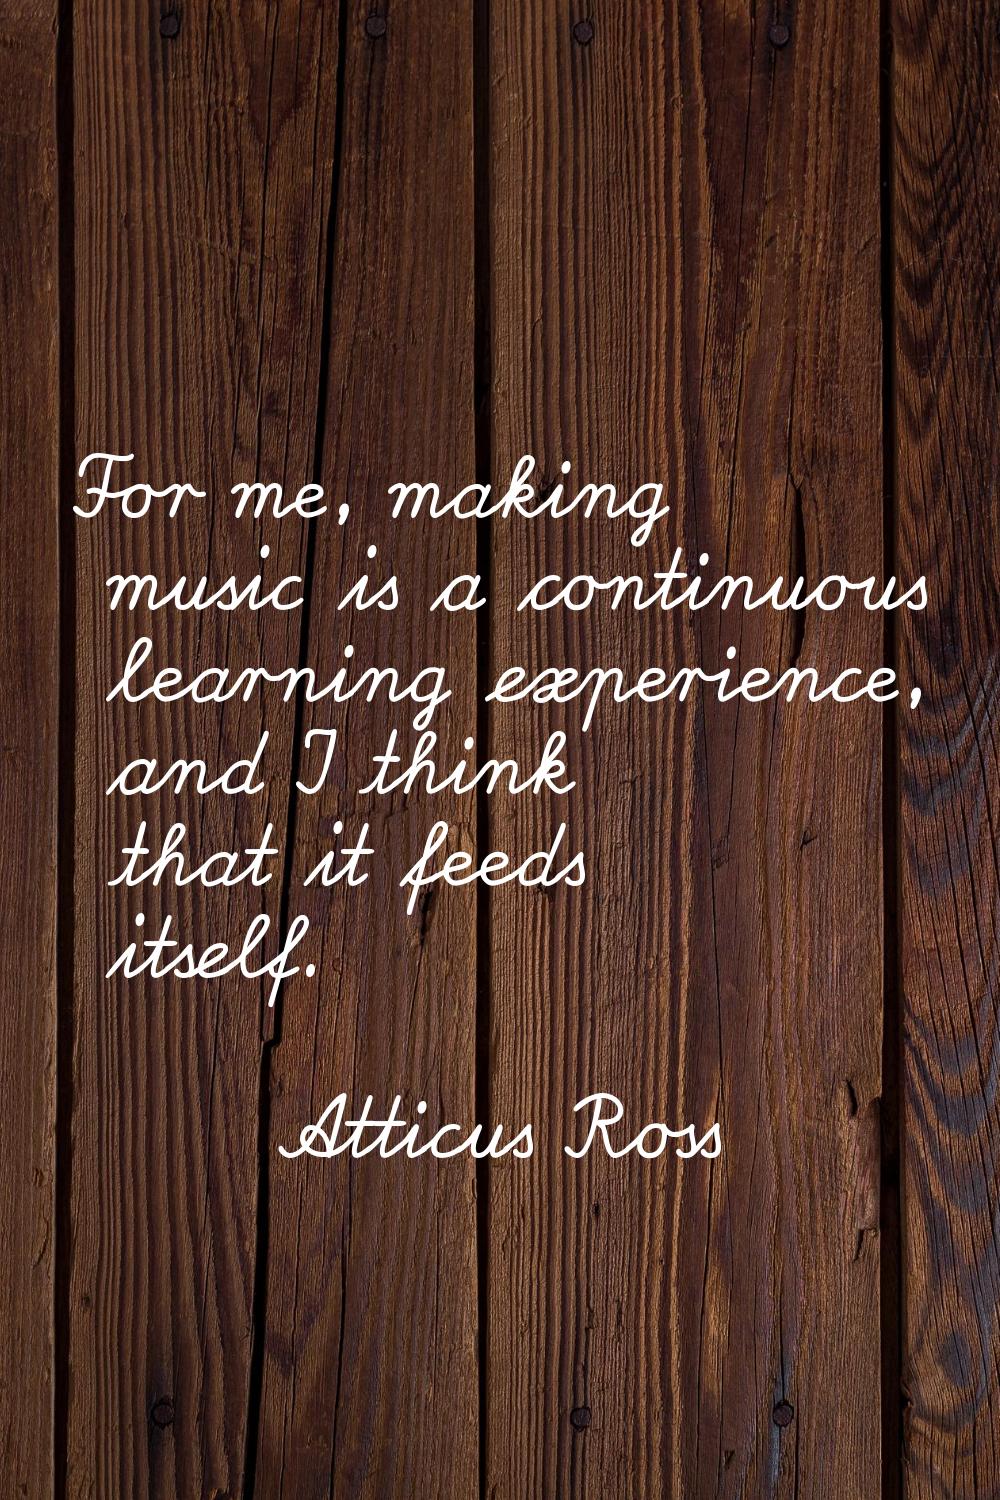 For me, making music is a continuous learning experience, and I think that it feeds itself.